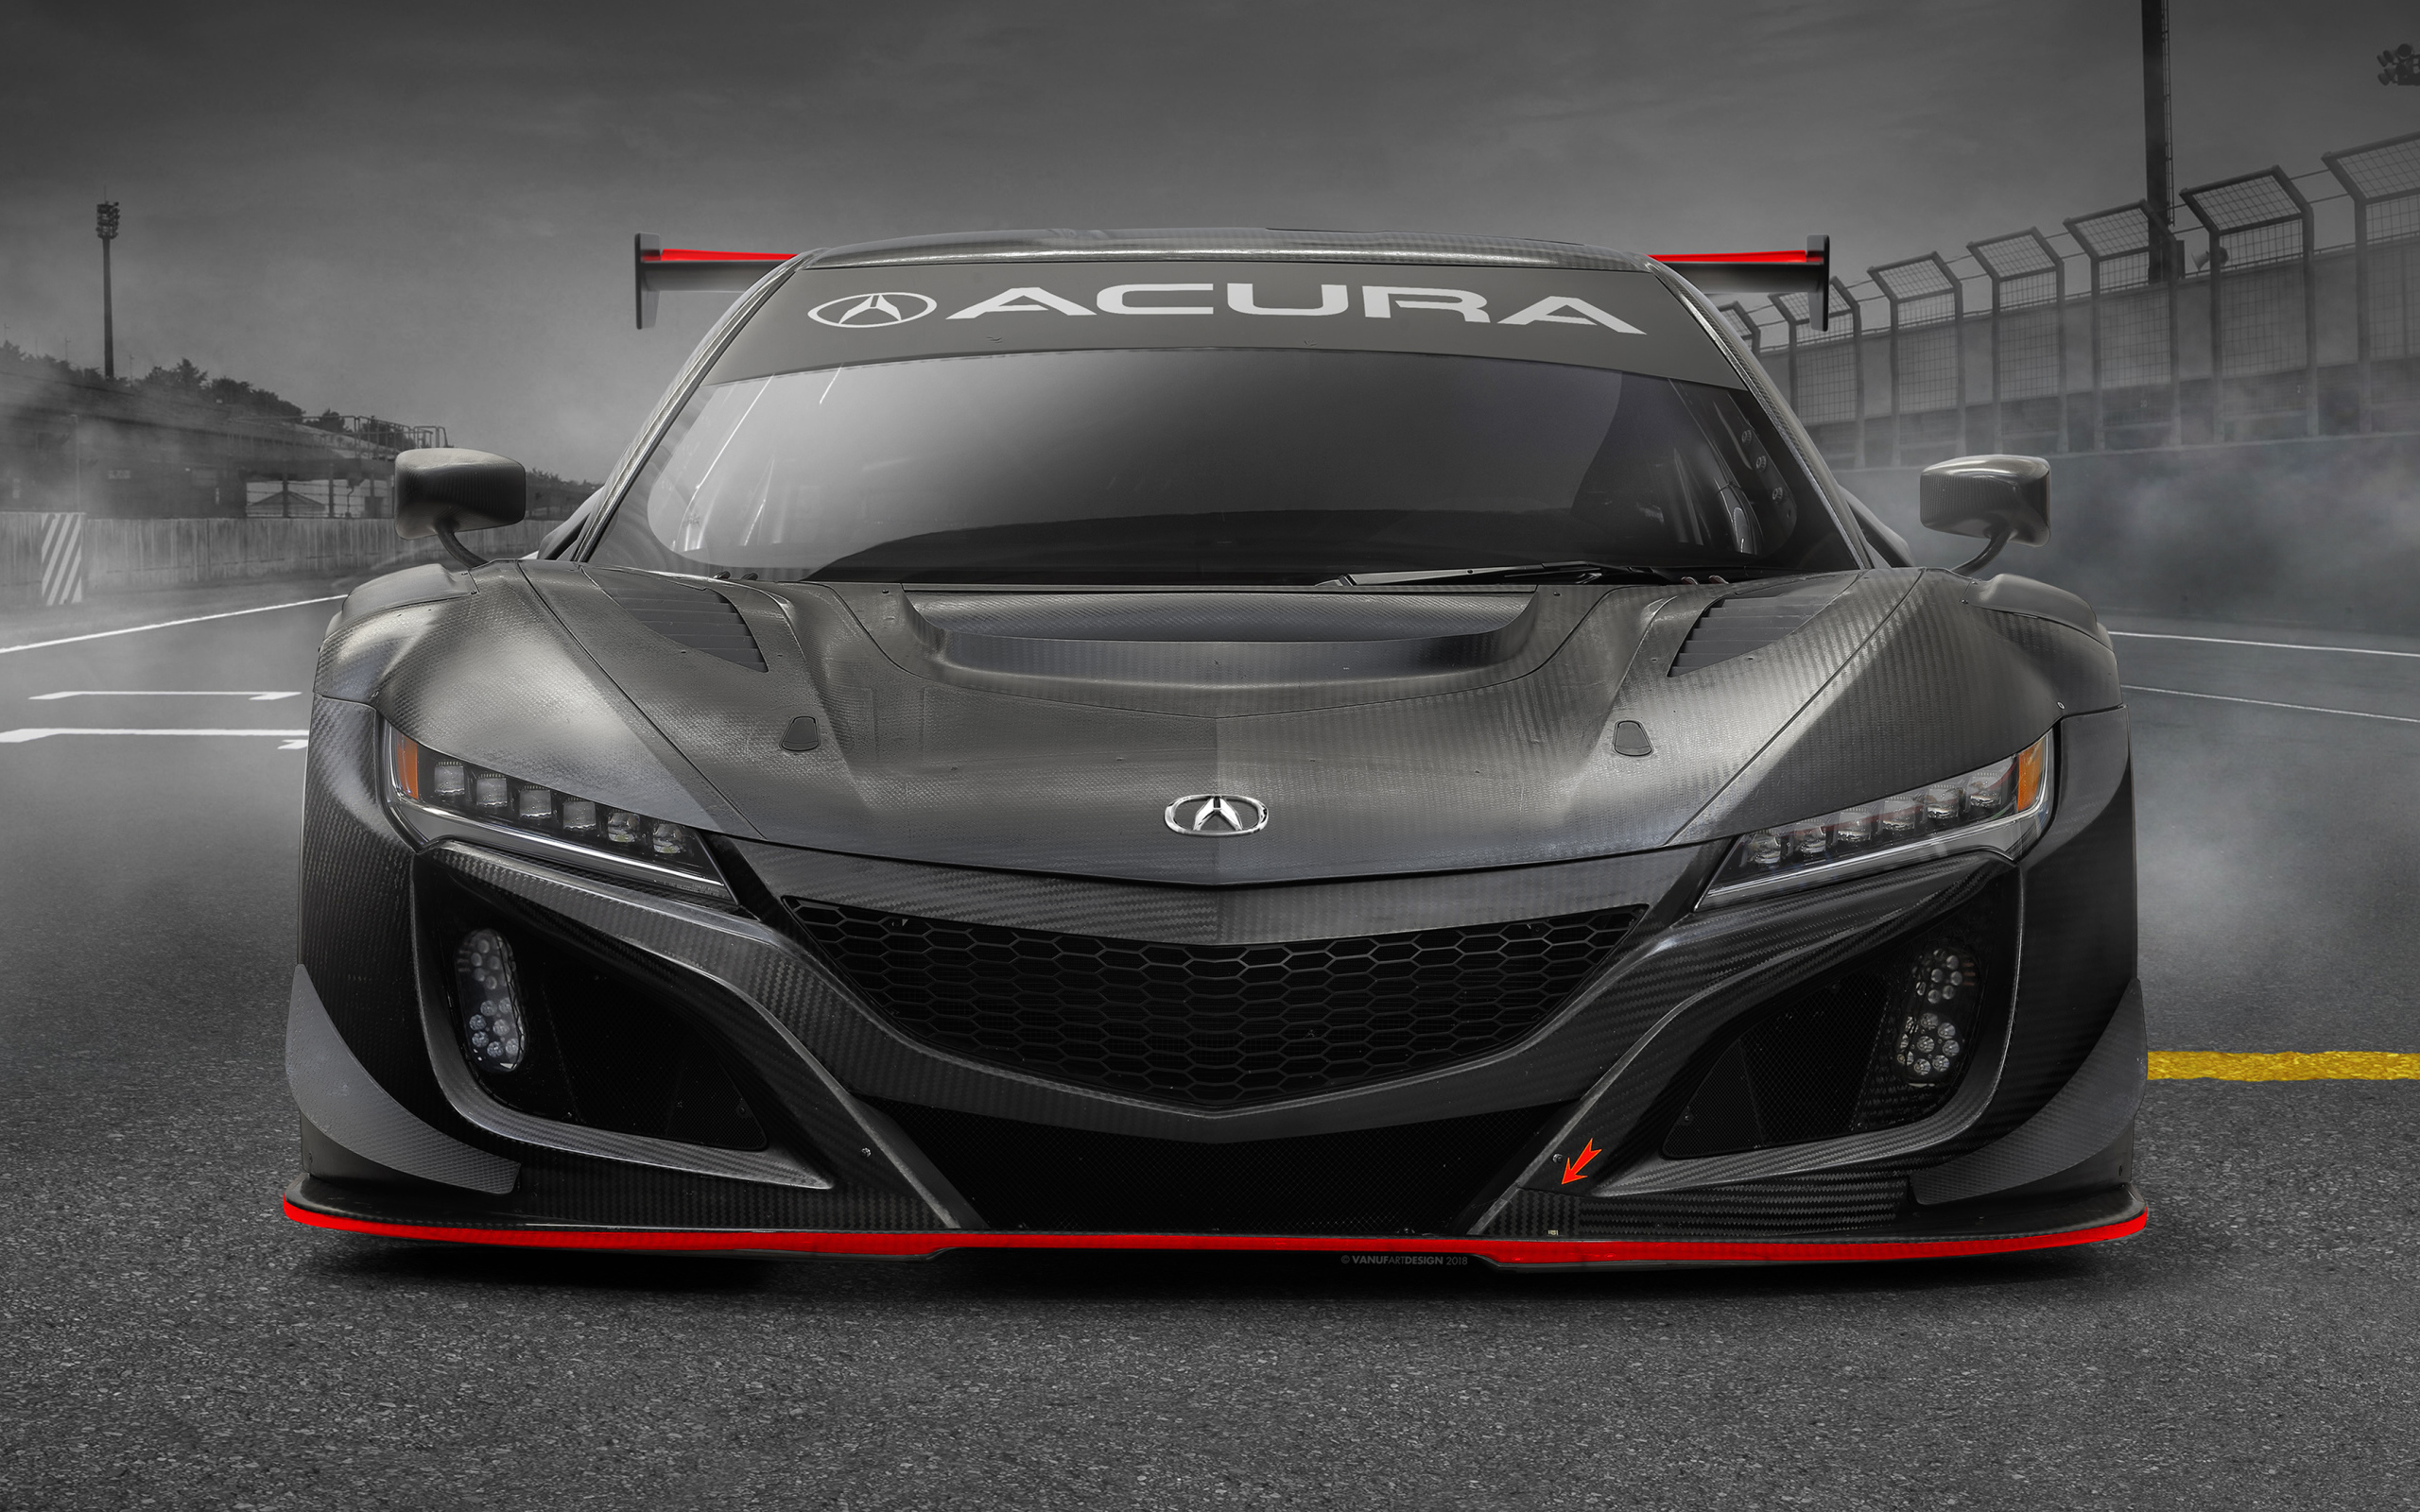 2019 Acura NSX GT3 Evo sports car front view